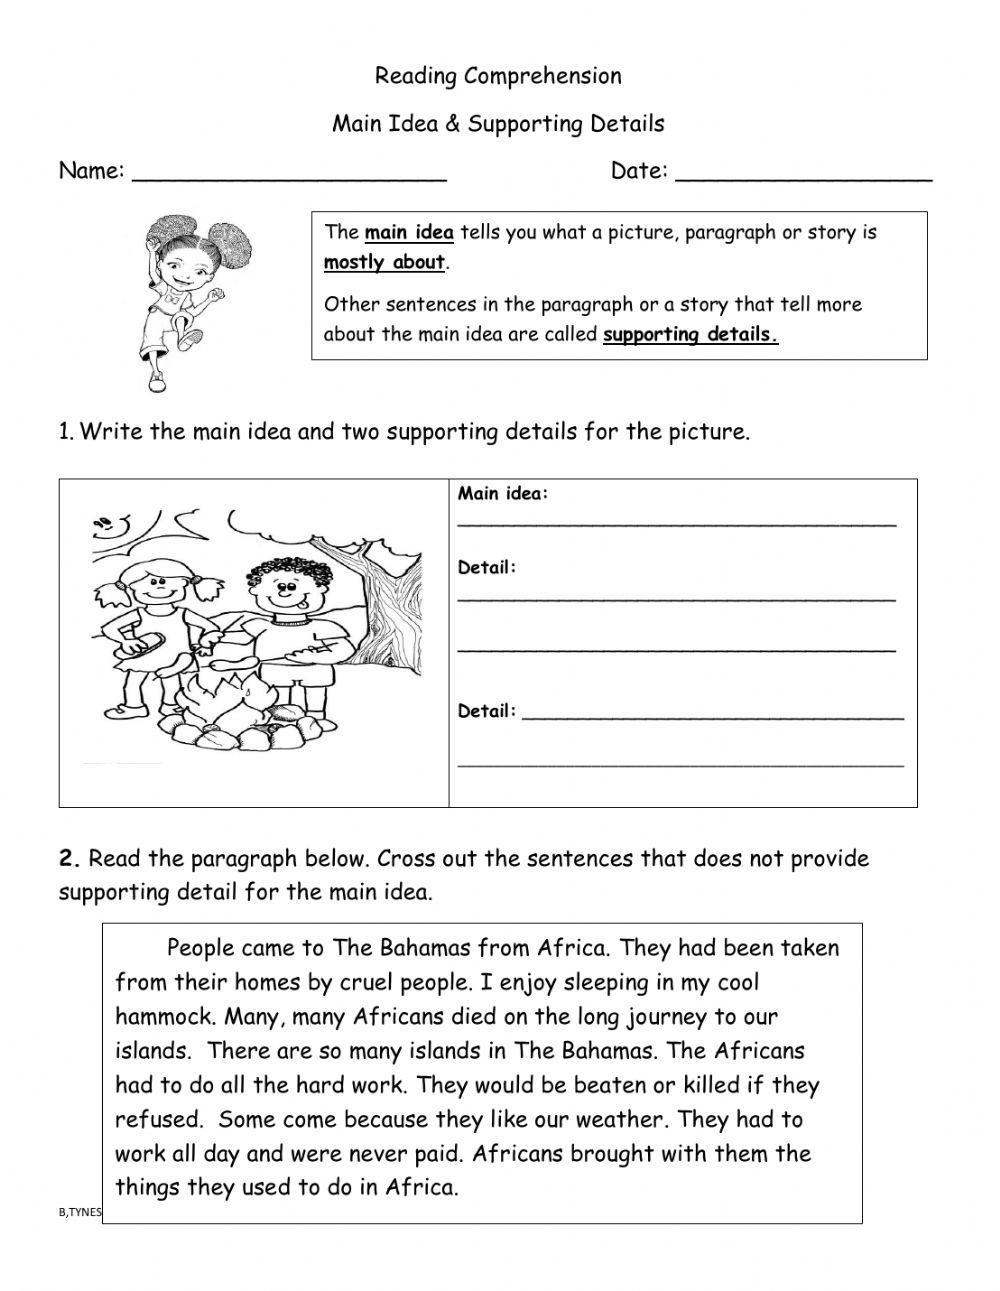 main-idea-and-supporting-details-2-worksheet-live-worksheets